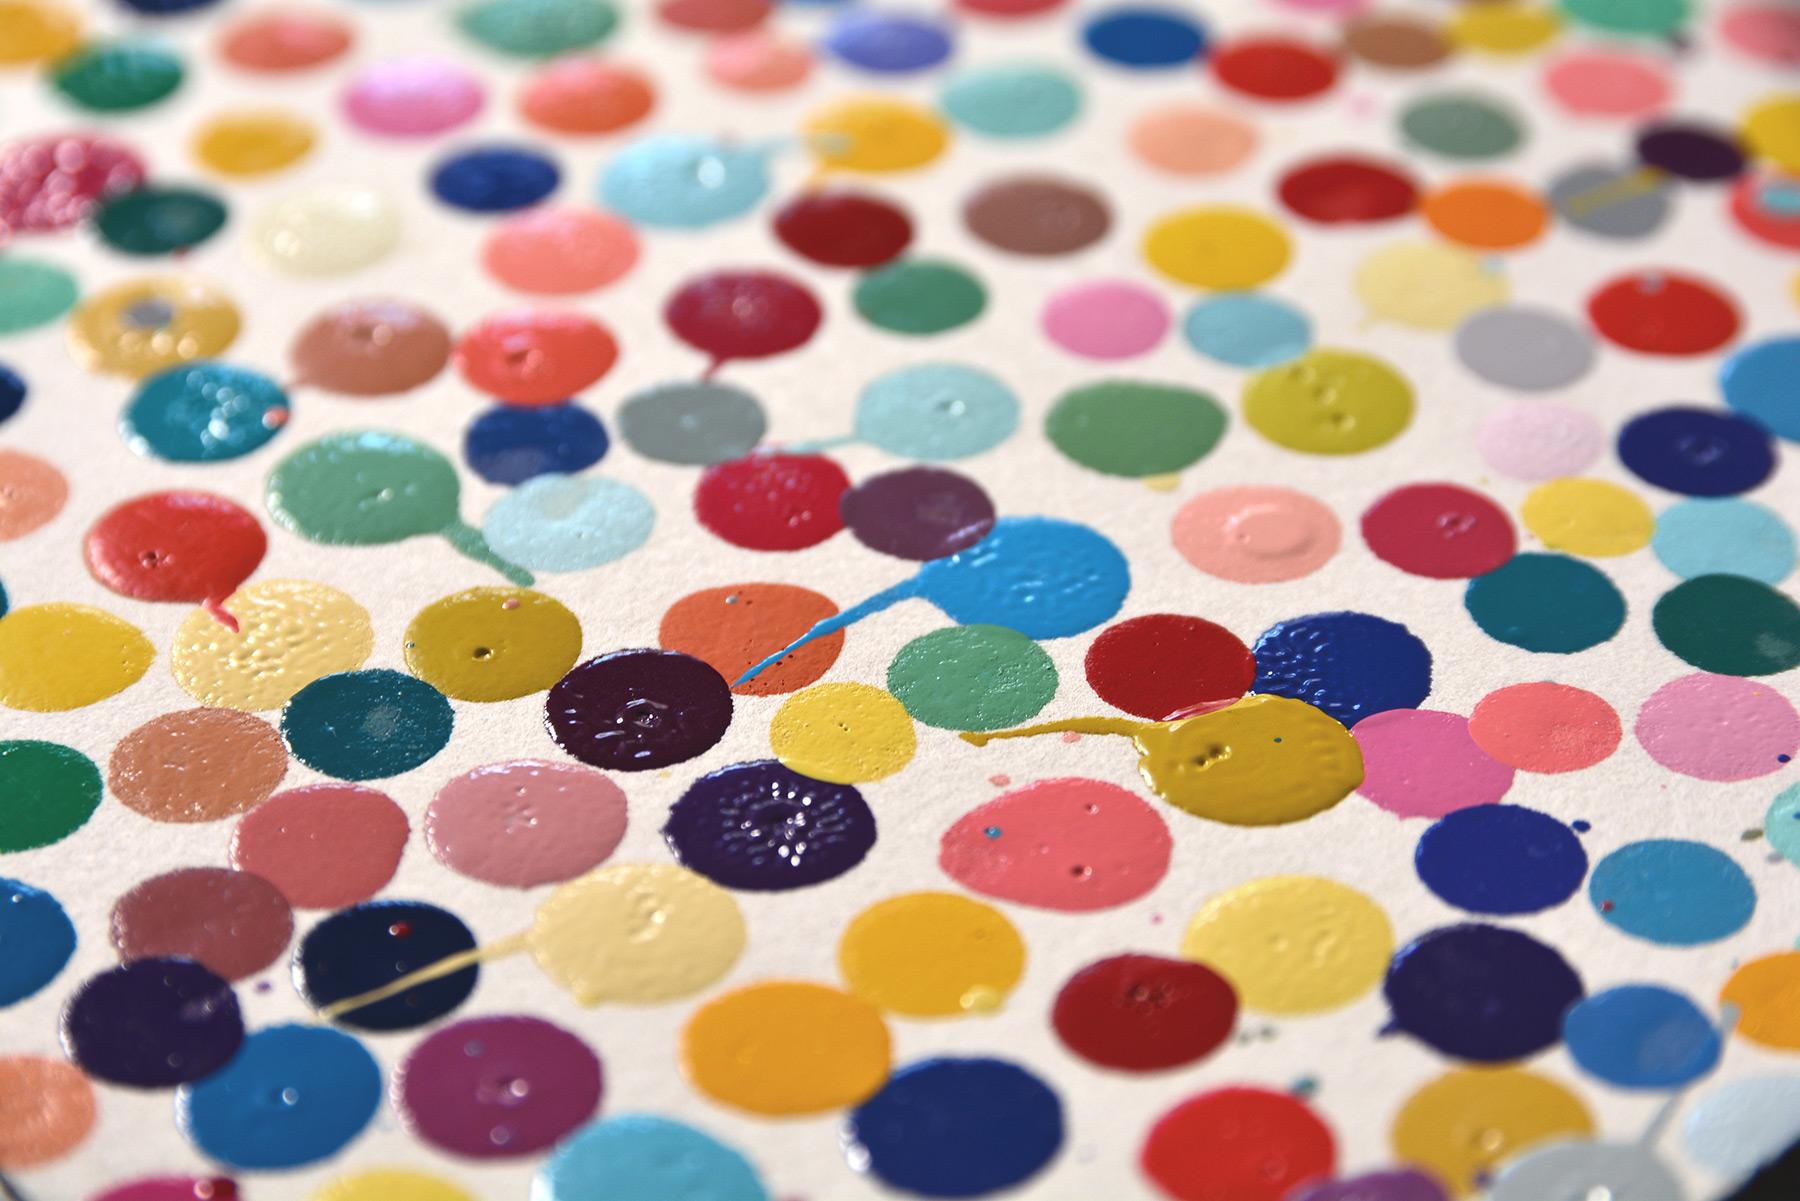 DAMIEN HIRST - THE CURRENCY. Original work The Currency Project. Dots. Colors - Abstract Expressionist Painting by Damien Hirst